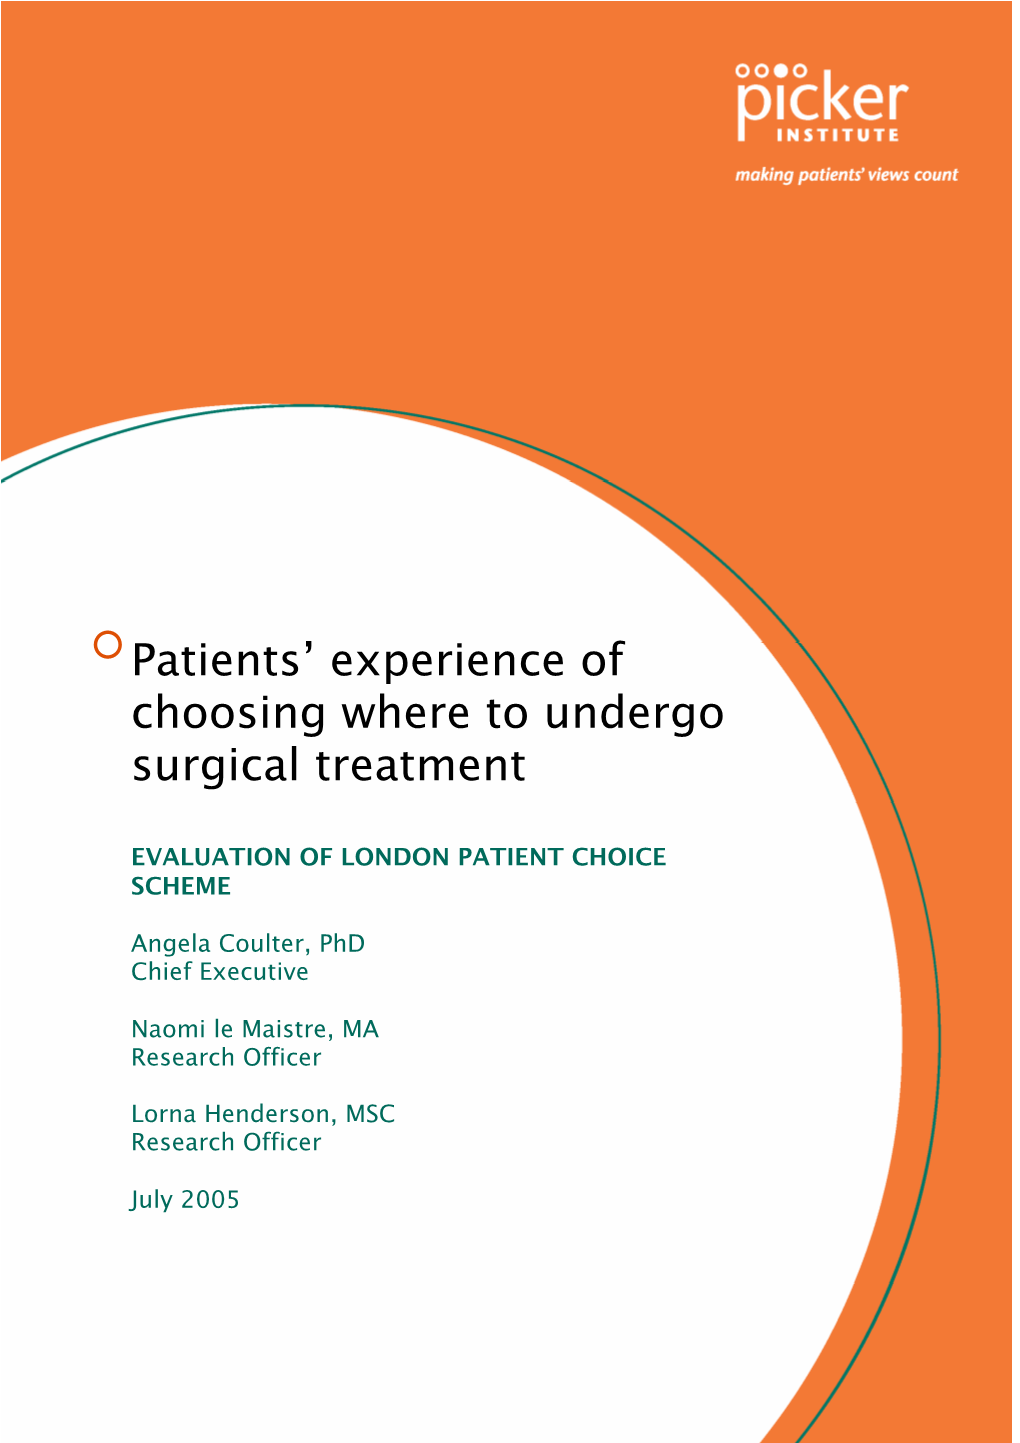 Patients' Experience of Choosing Where to Undergo Surgical Treatment